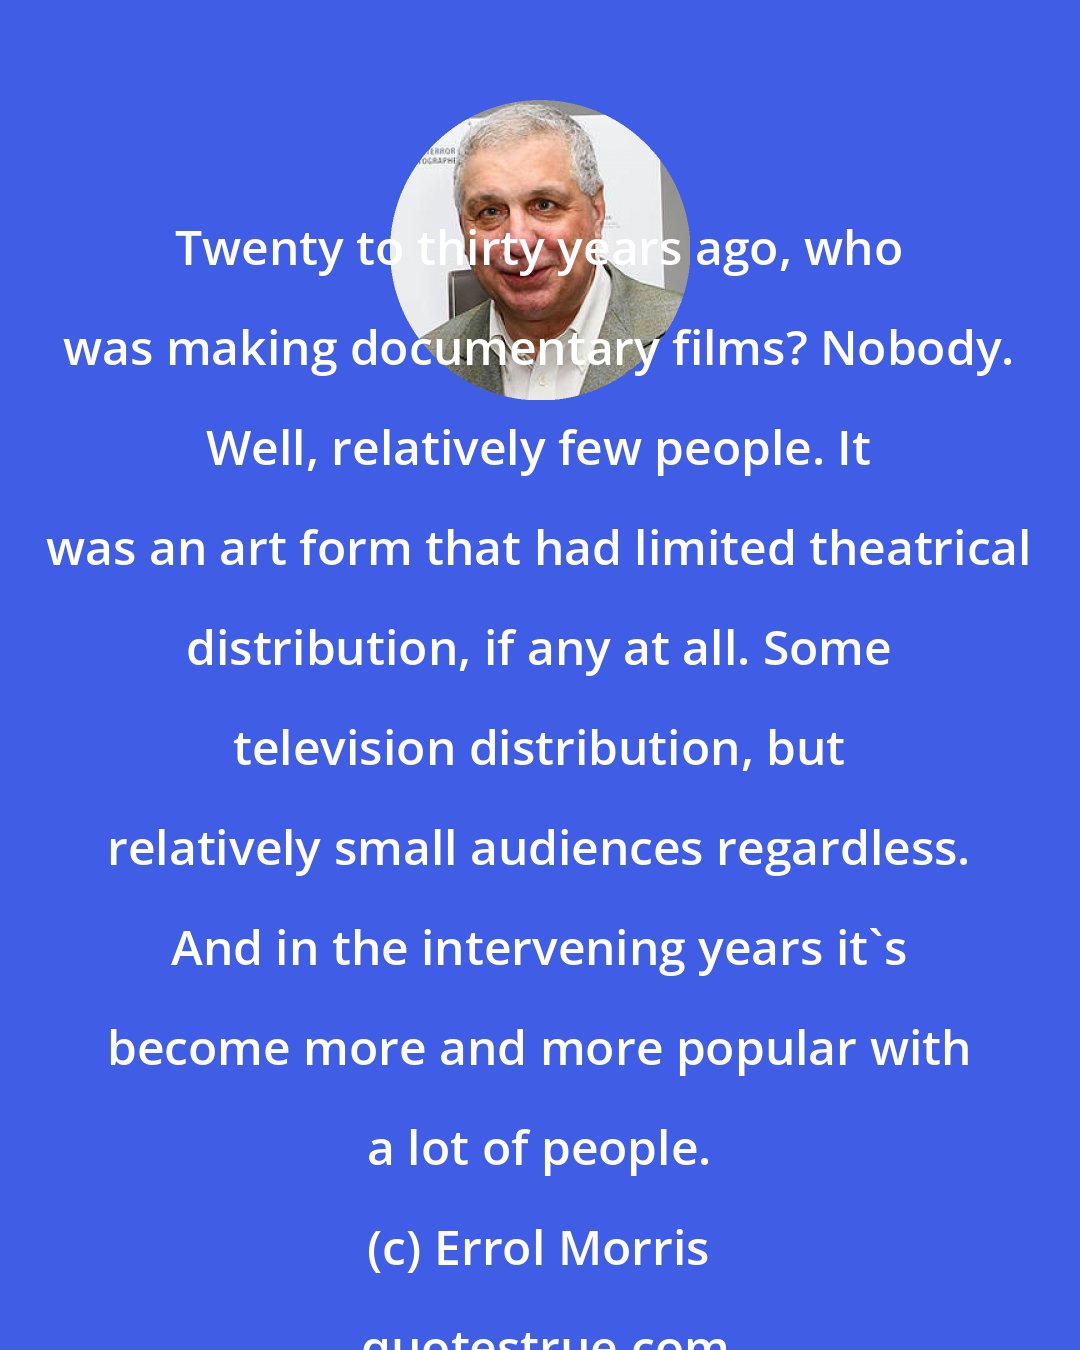 Errol Morris: Twenty to thirty years ago, who was making documentary films? Nobody. Well, relatively few people. It was an art form that had limited theatrical distribution, if any at all. Some television distribution, but relatively small audiences regardless. And in the intervening years it's become more and more popular with a lot of people.